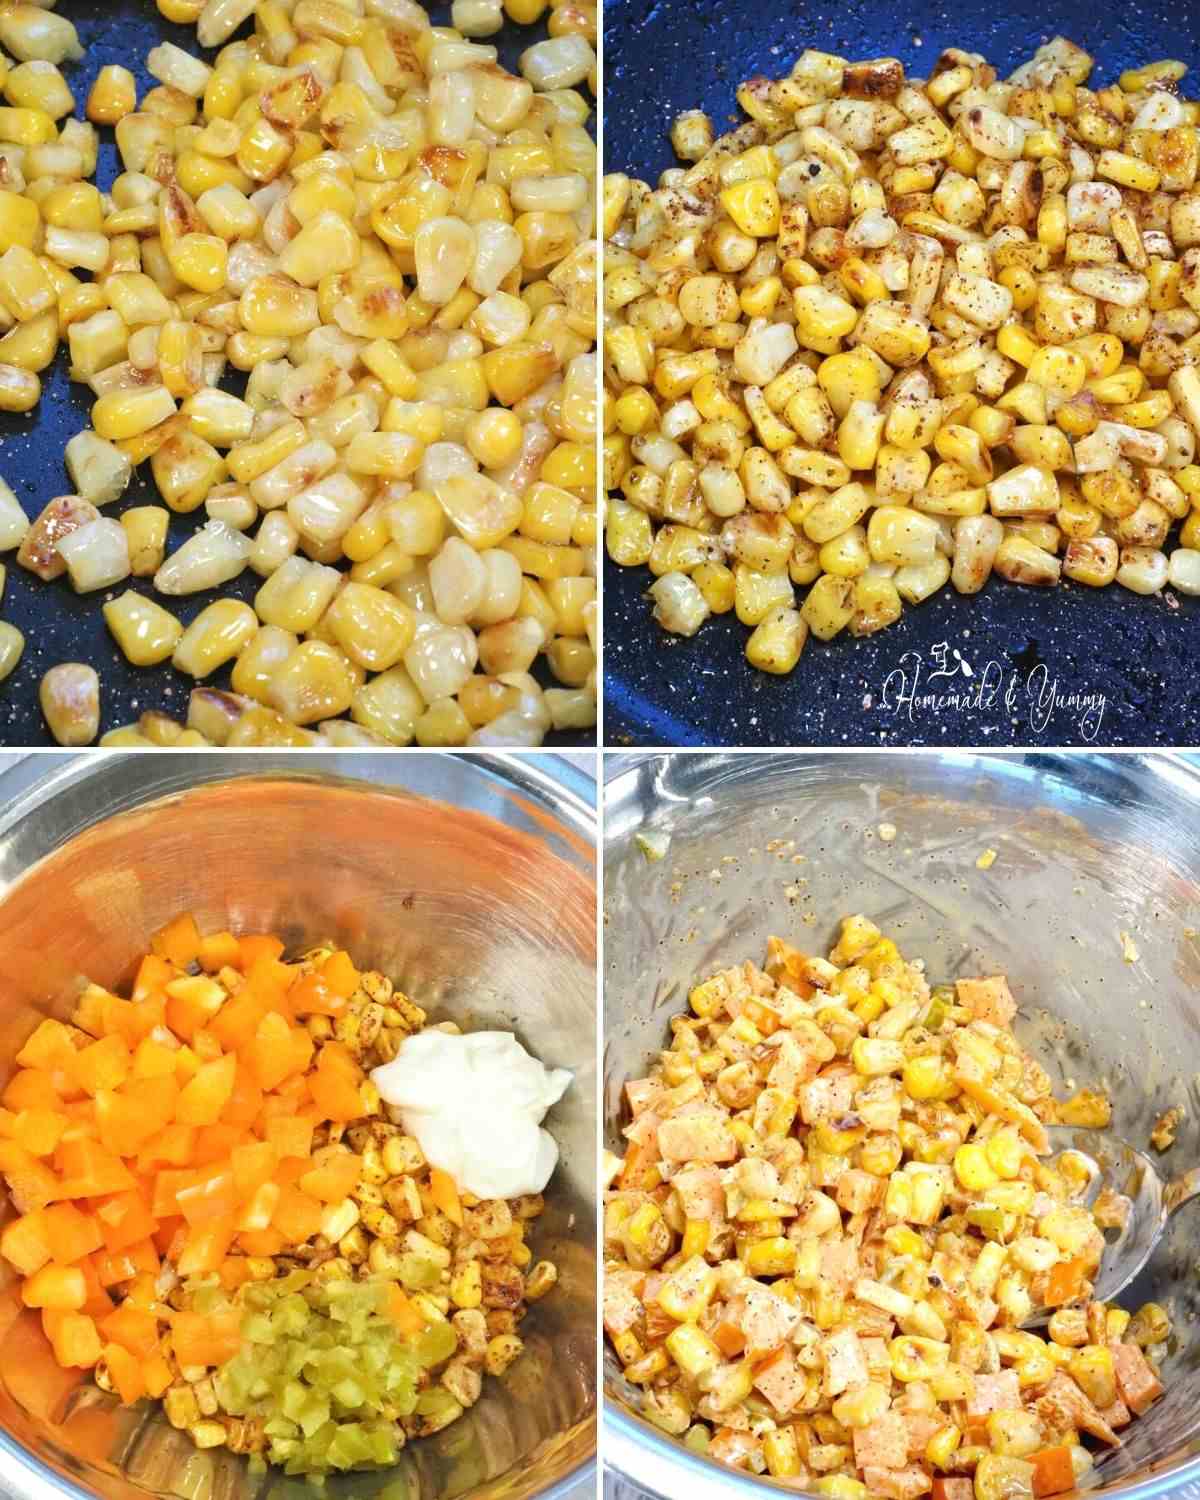 Making the corn filling for the avocado boats.